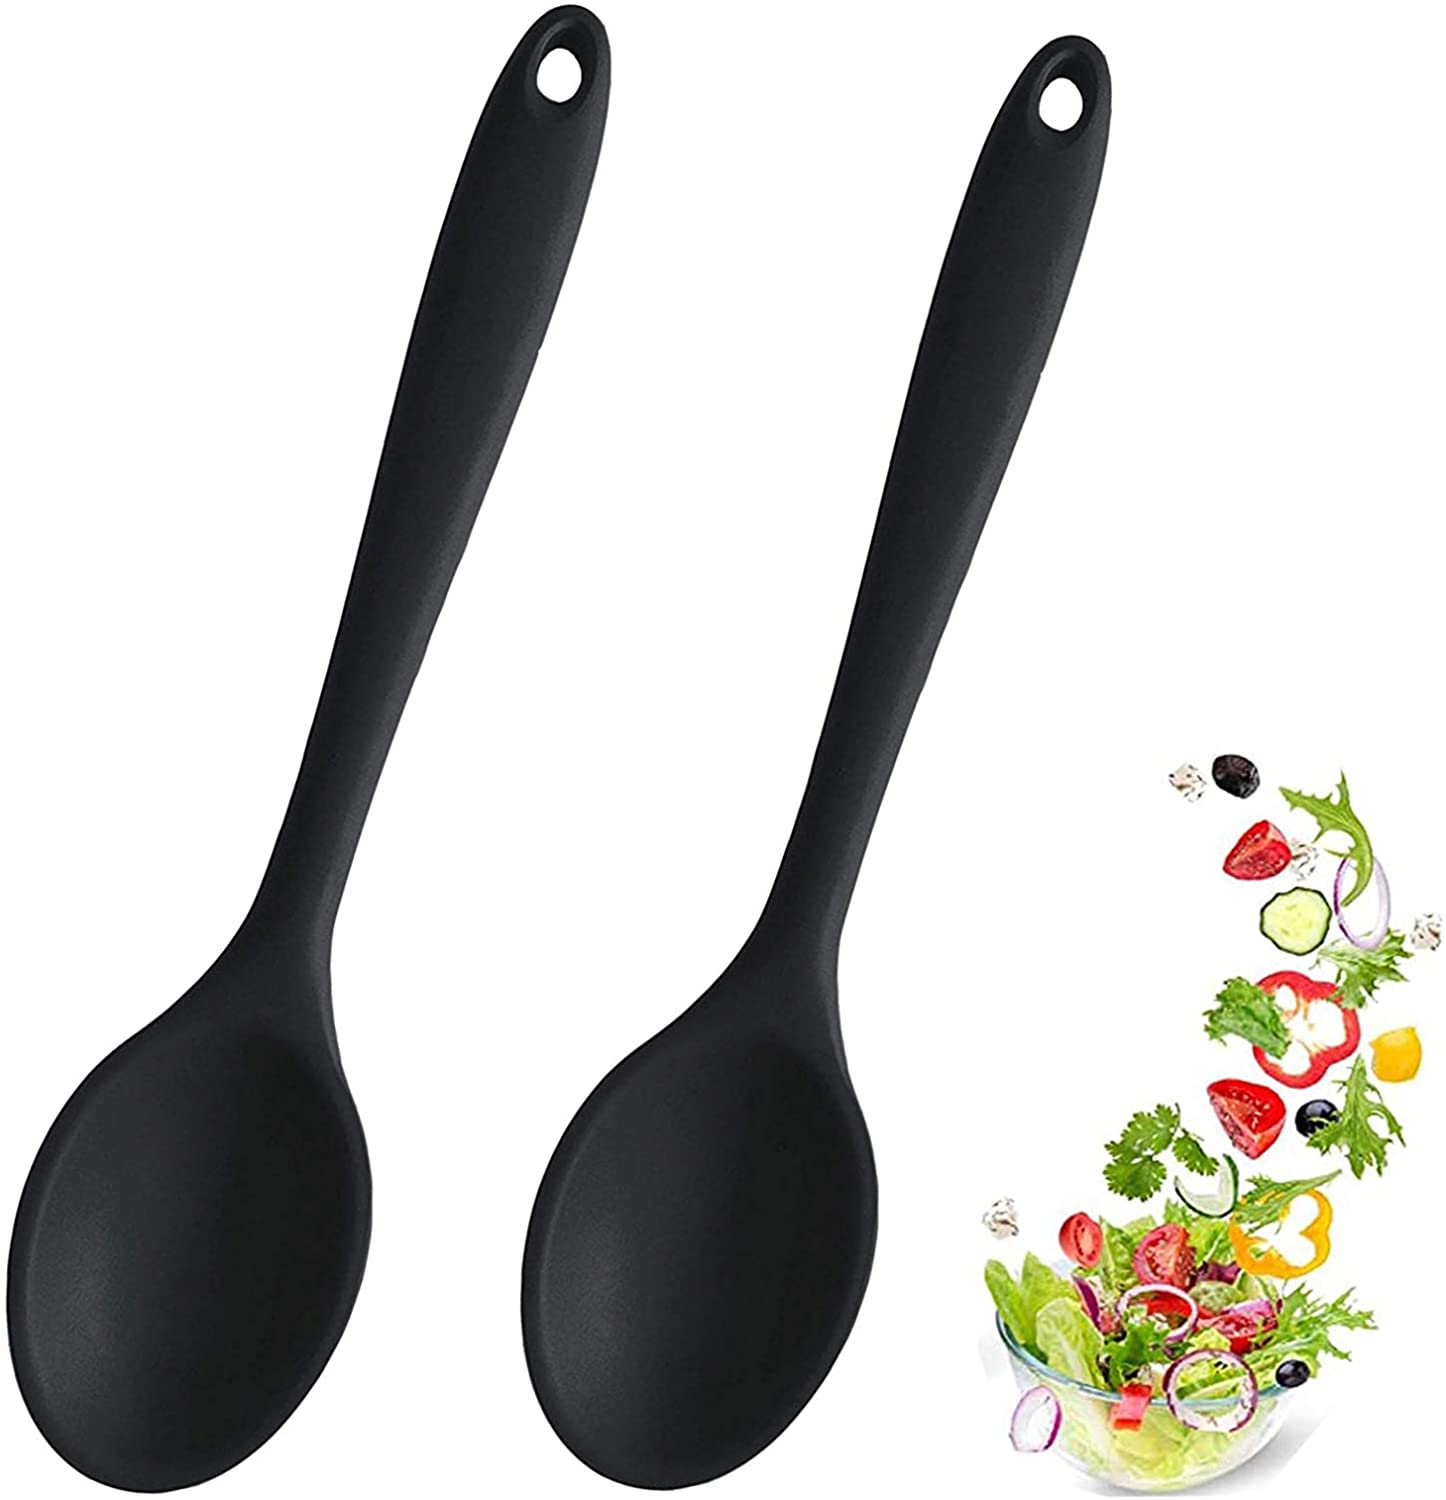 2 Pcs Silicone Spoons for Cooking Heat